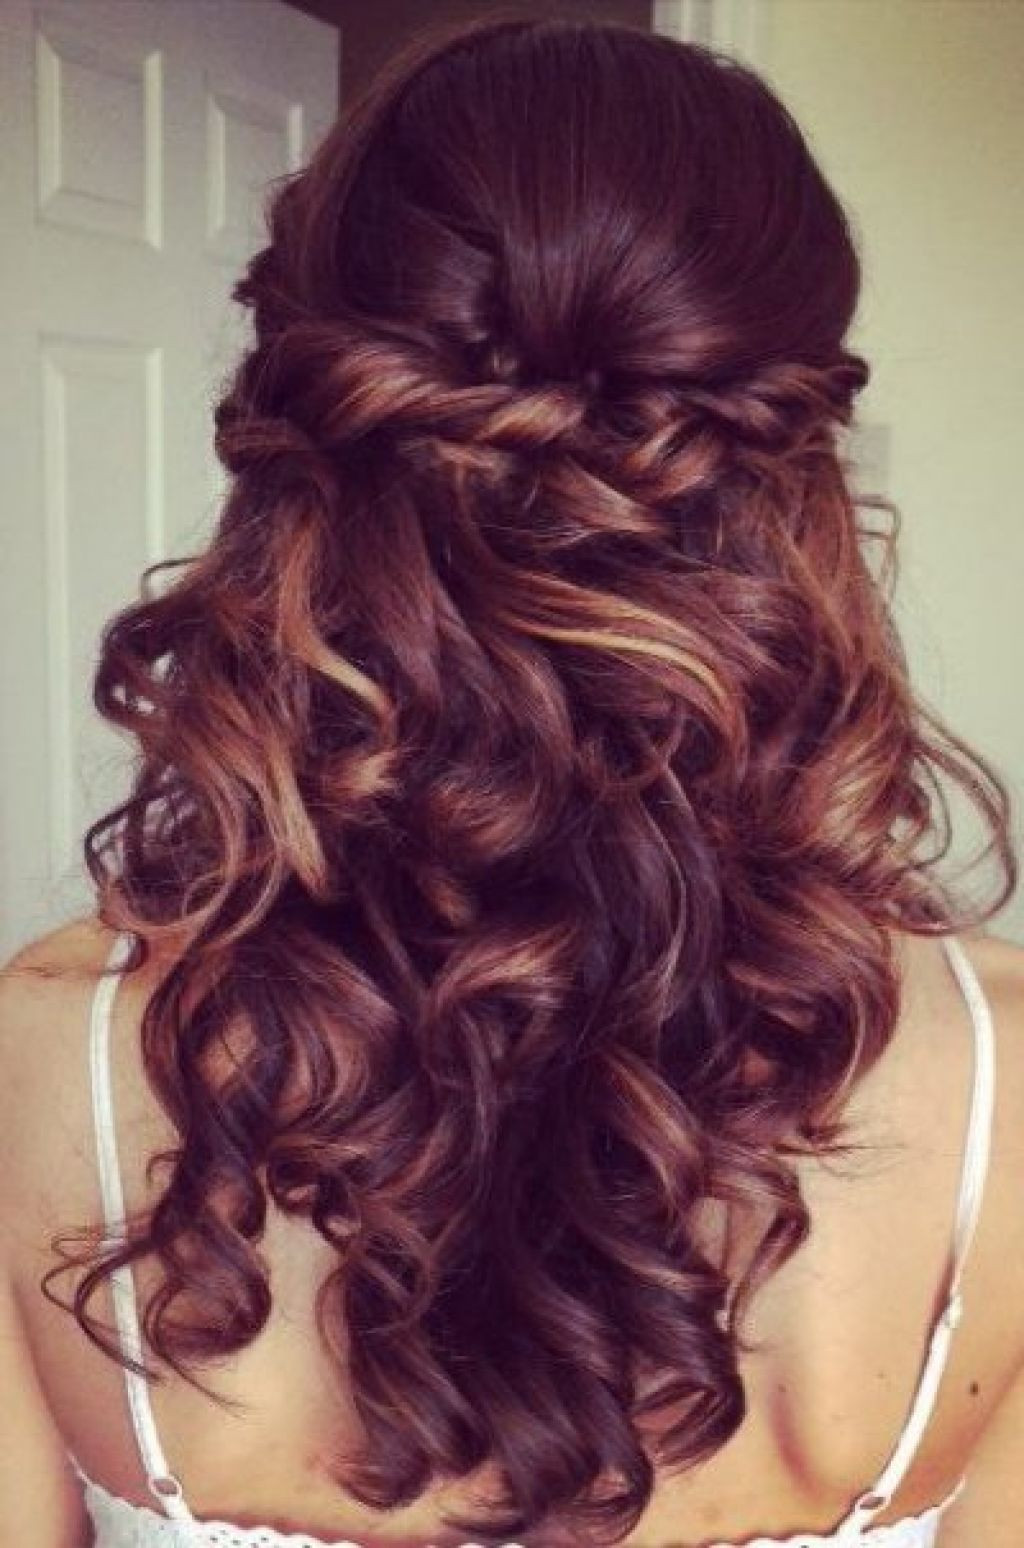 Pretty Hairstyles For Prom
 Elegant Curly Half Updo Prom Hairstyle With Bouncy Long